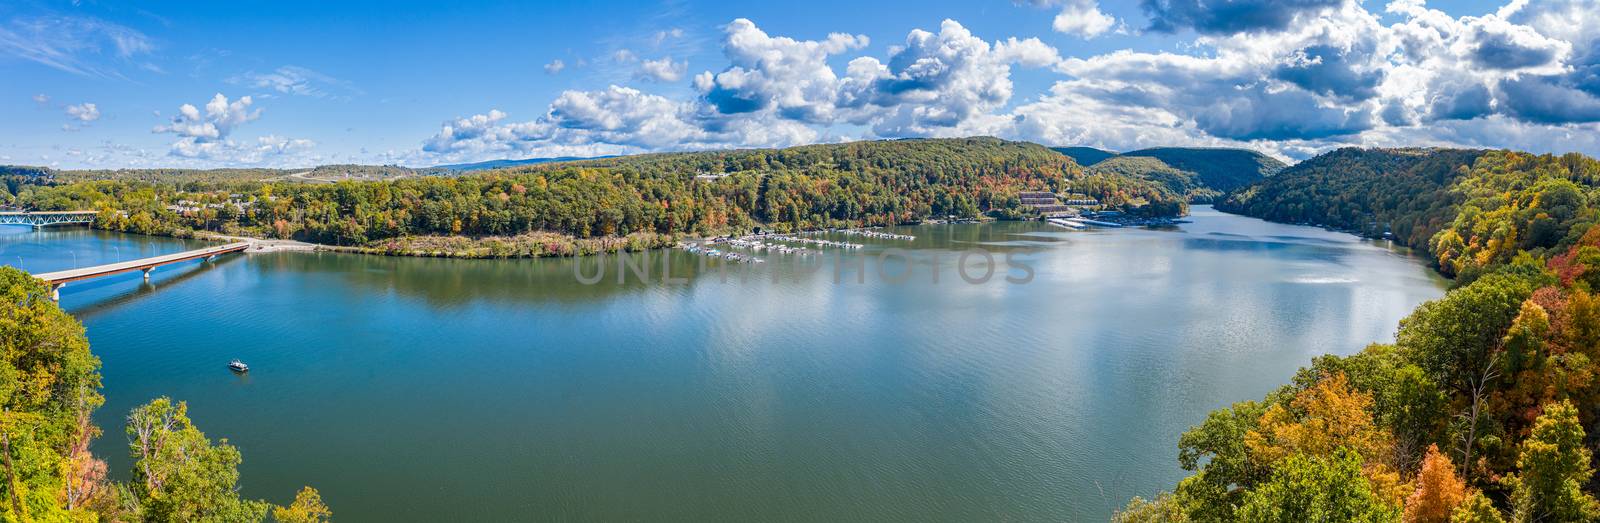 Aerial panorama of fall colors on Cheat Lake Morgantown, WV by steheap